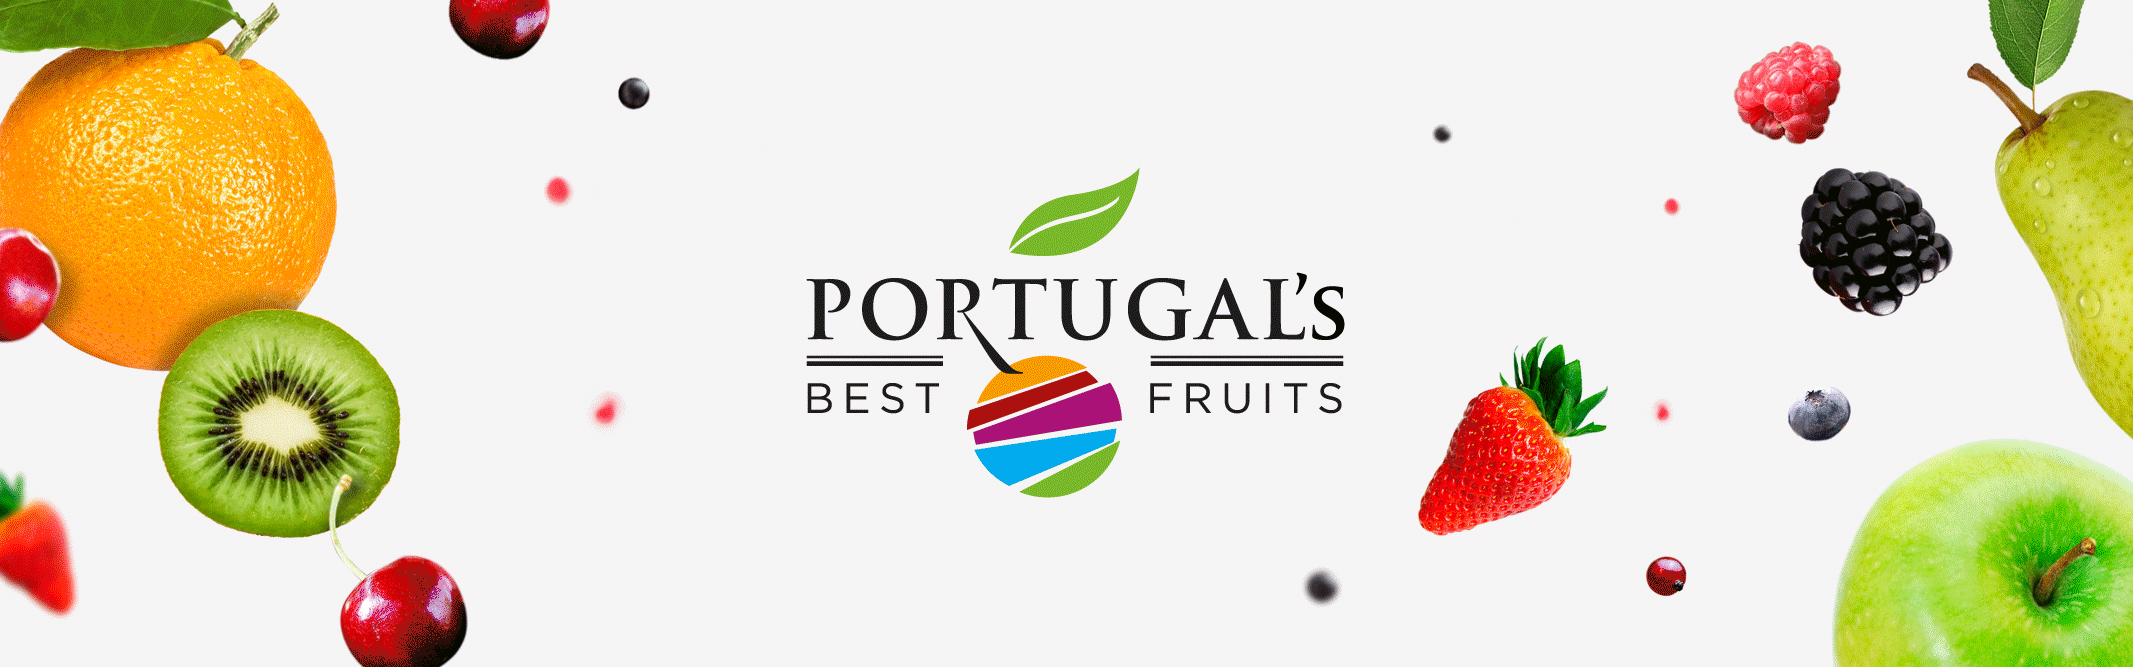 Portugal's Best Fruits